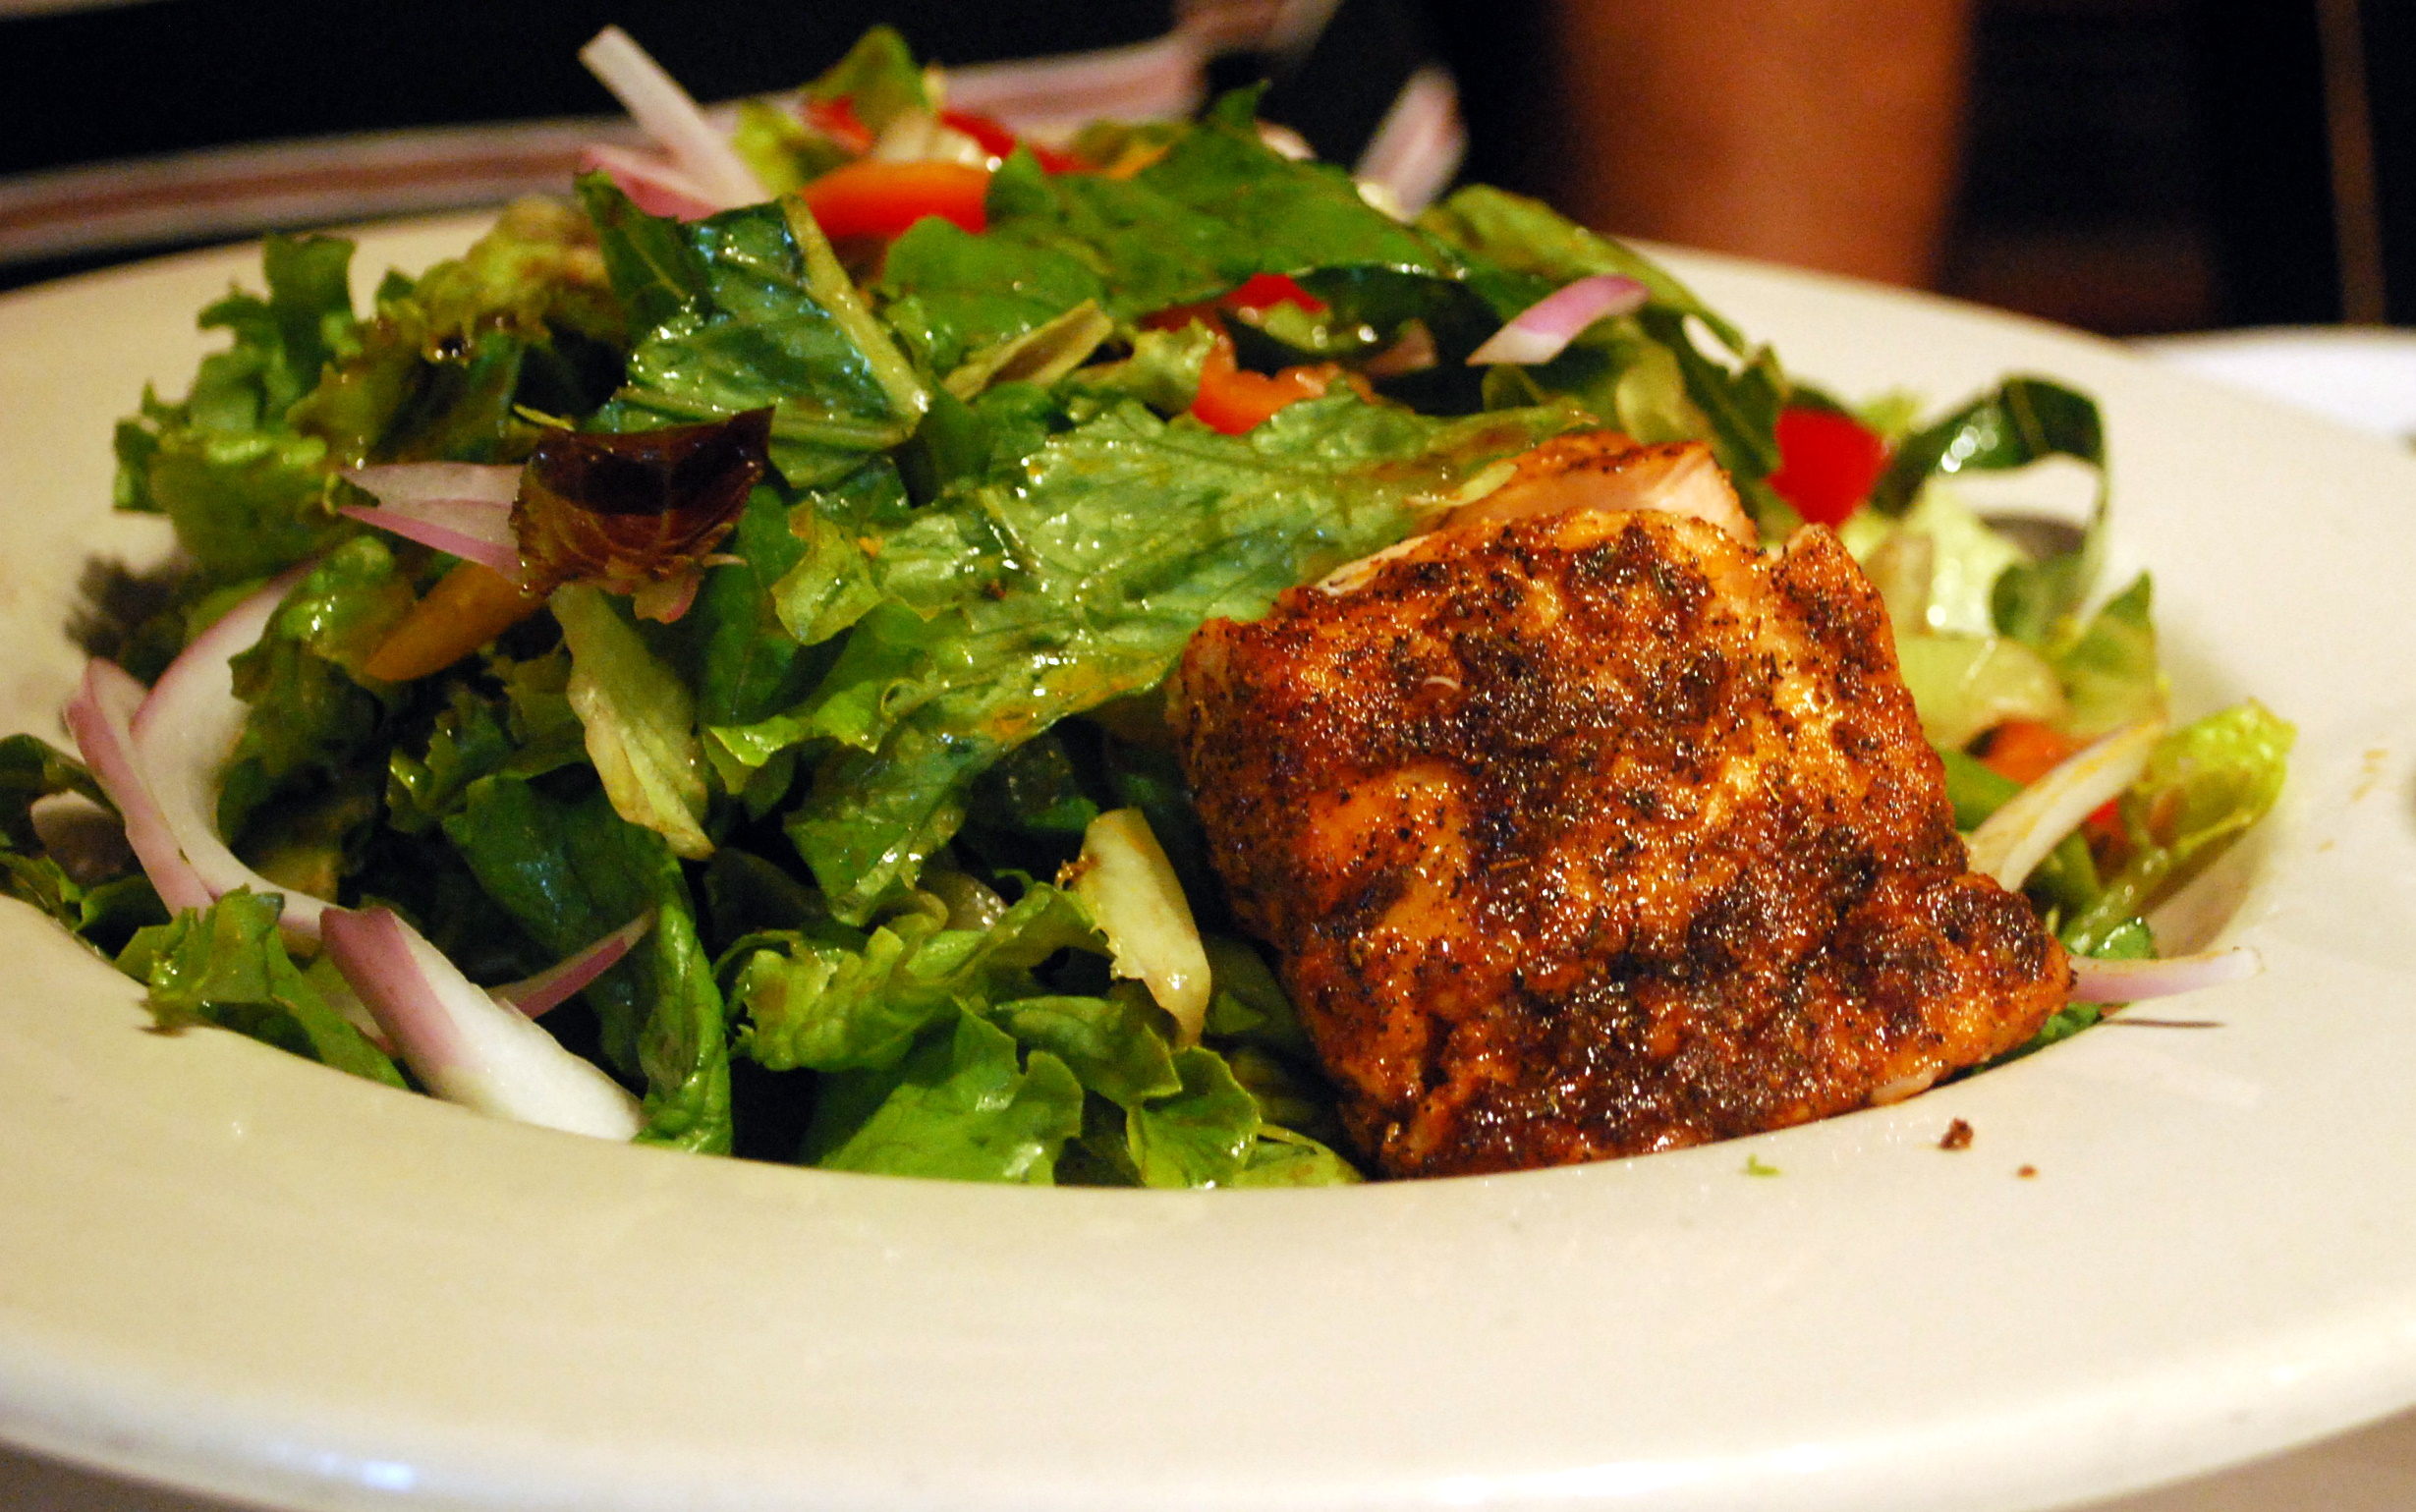 Ted's dish was the special. Blackened salmon served over a green salad. Terrific!